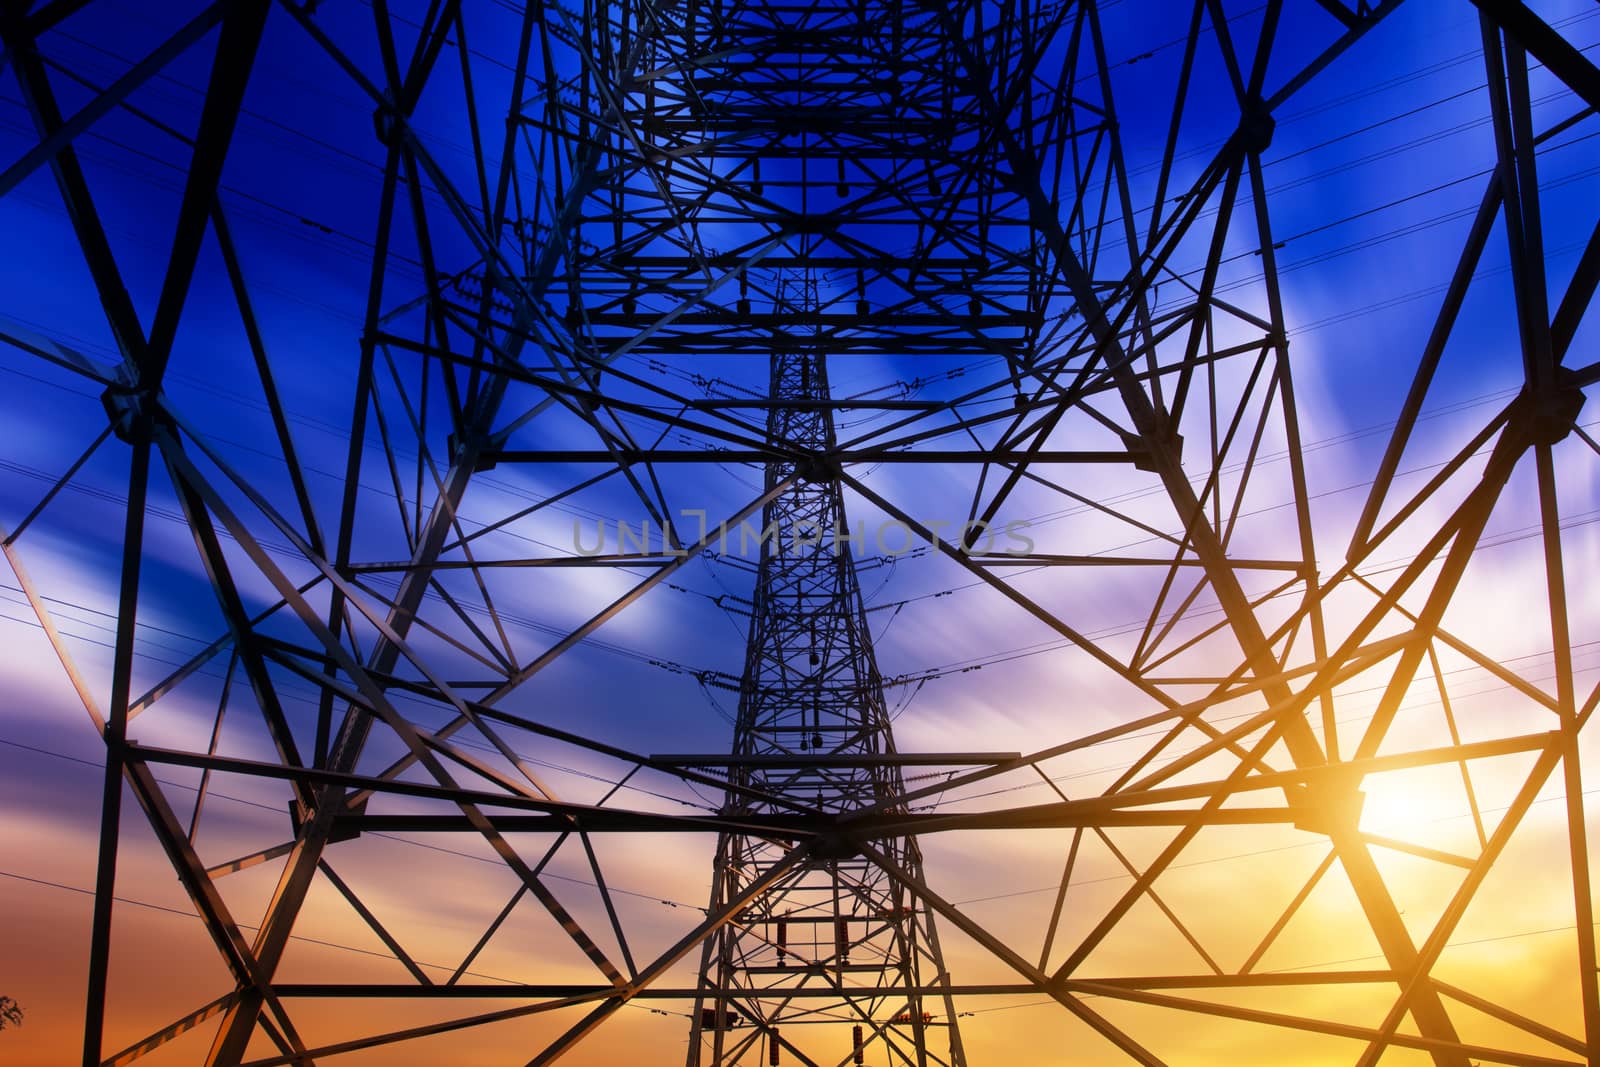 High voltage tower at sunset